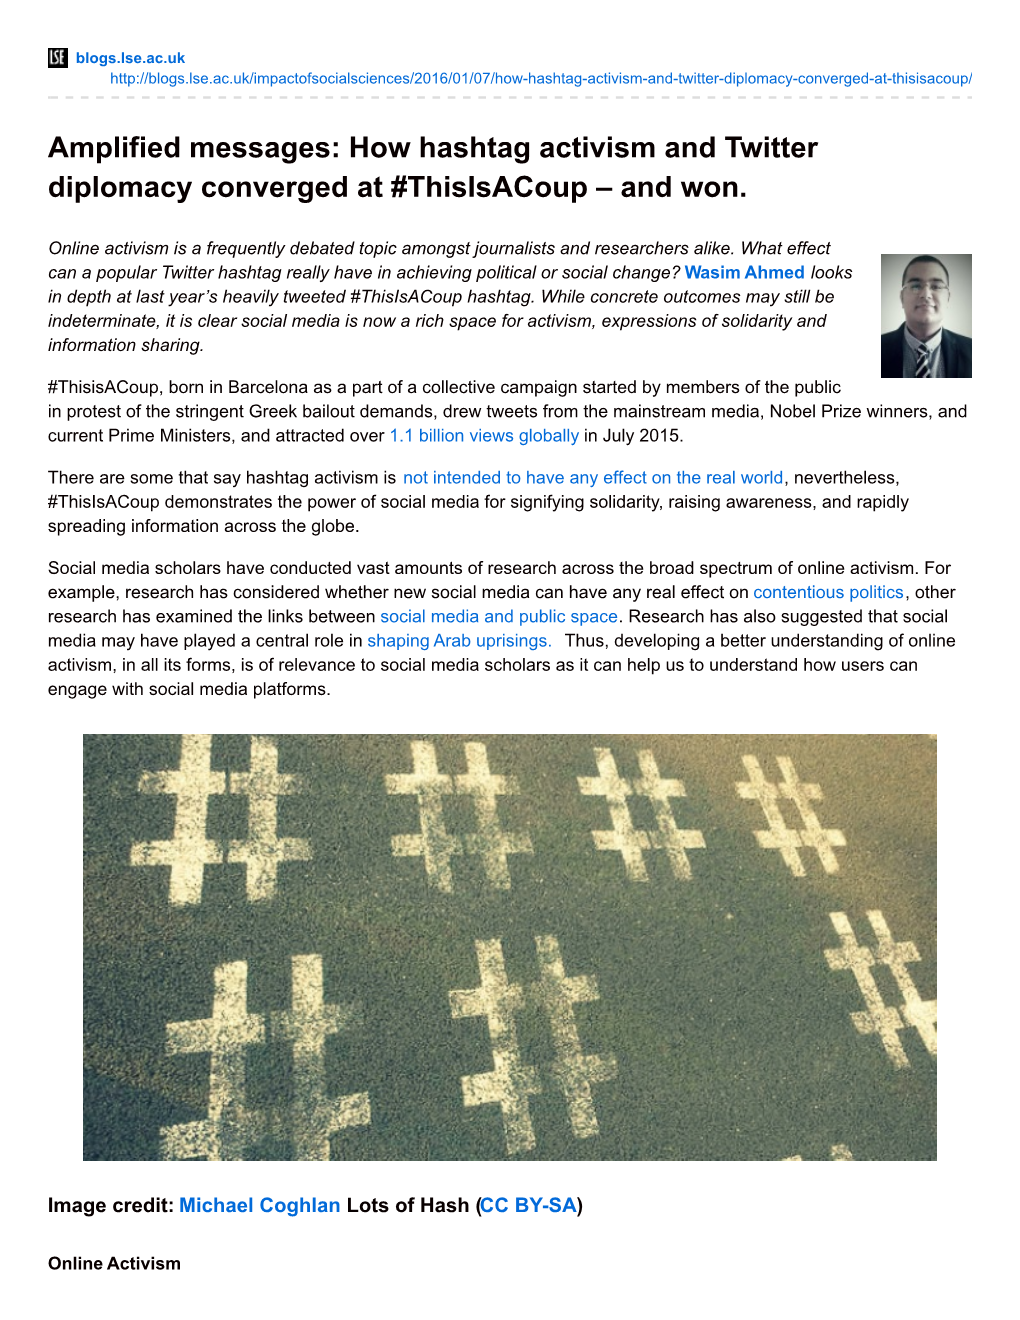 How Hashtag Activism and Twitter Diplomacy Converged at #Thisisacoup – and Won